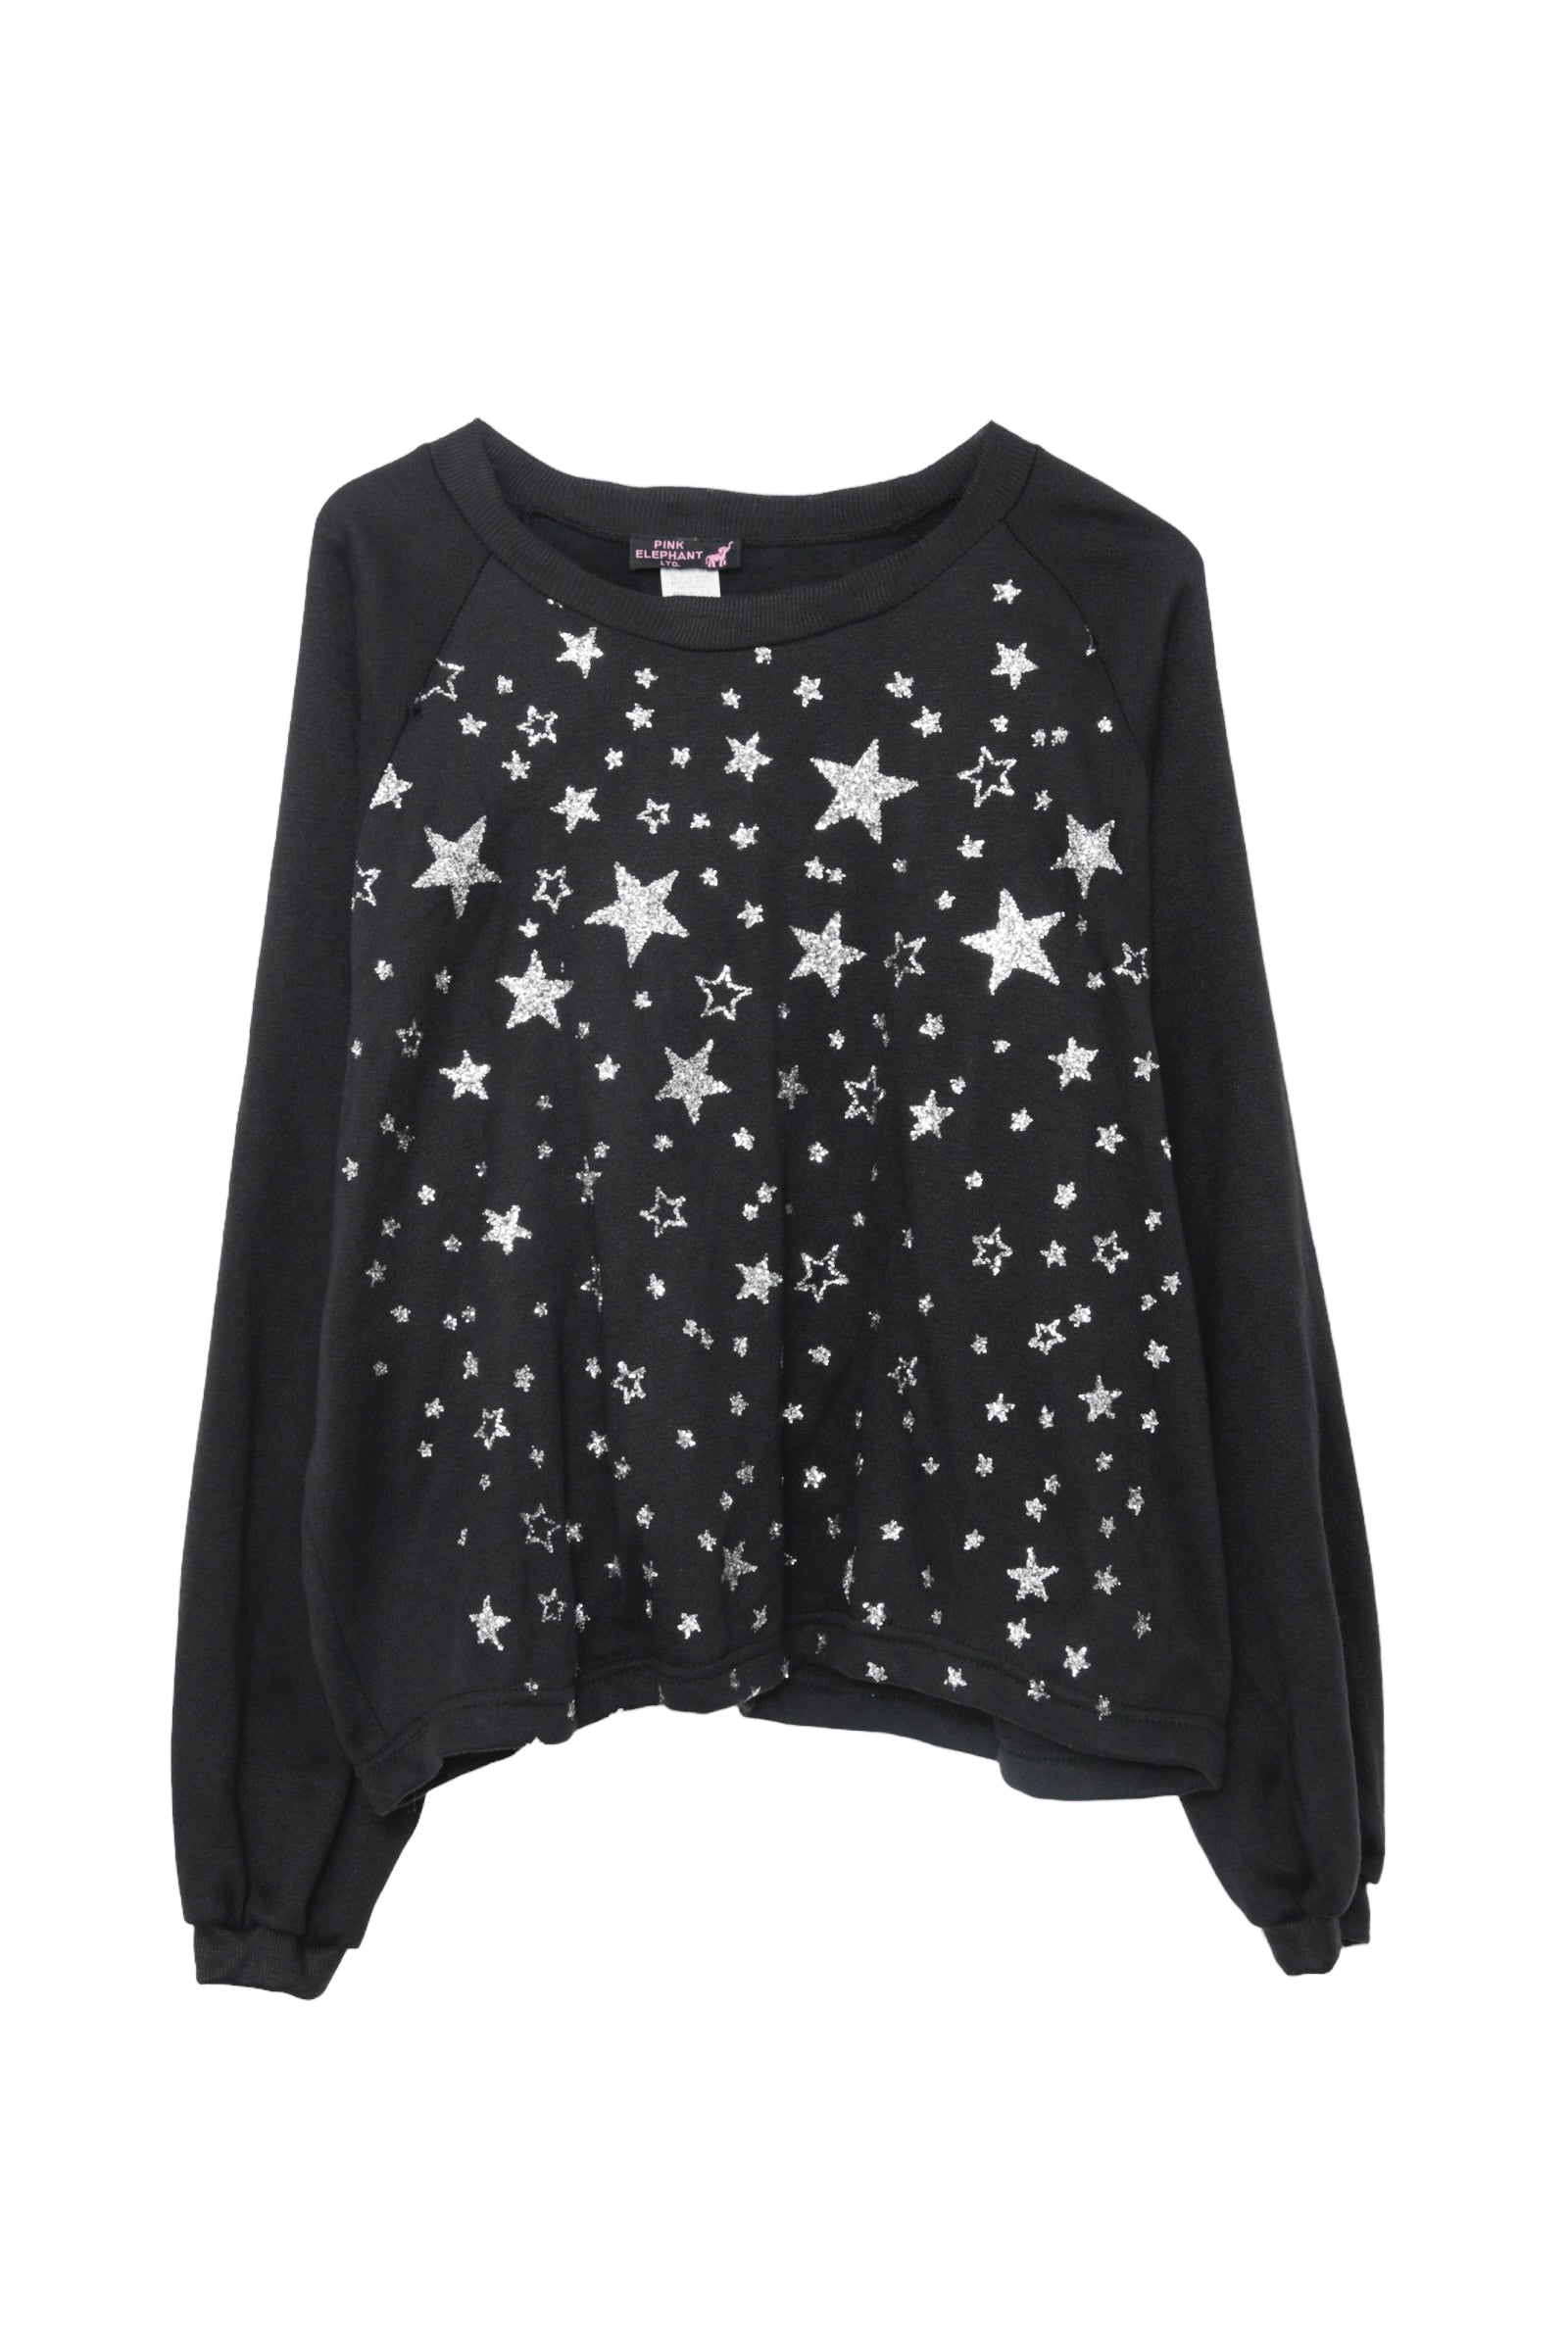 STAR PULLOVER SWEAT TOP